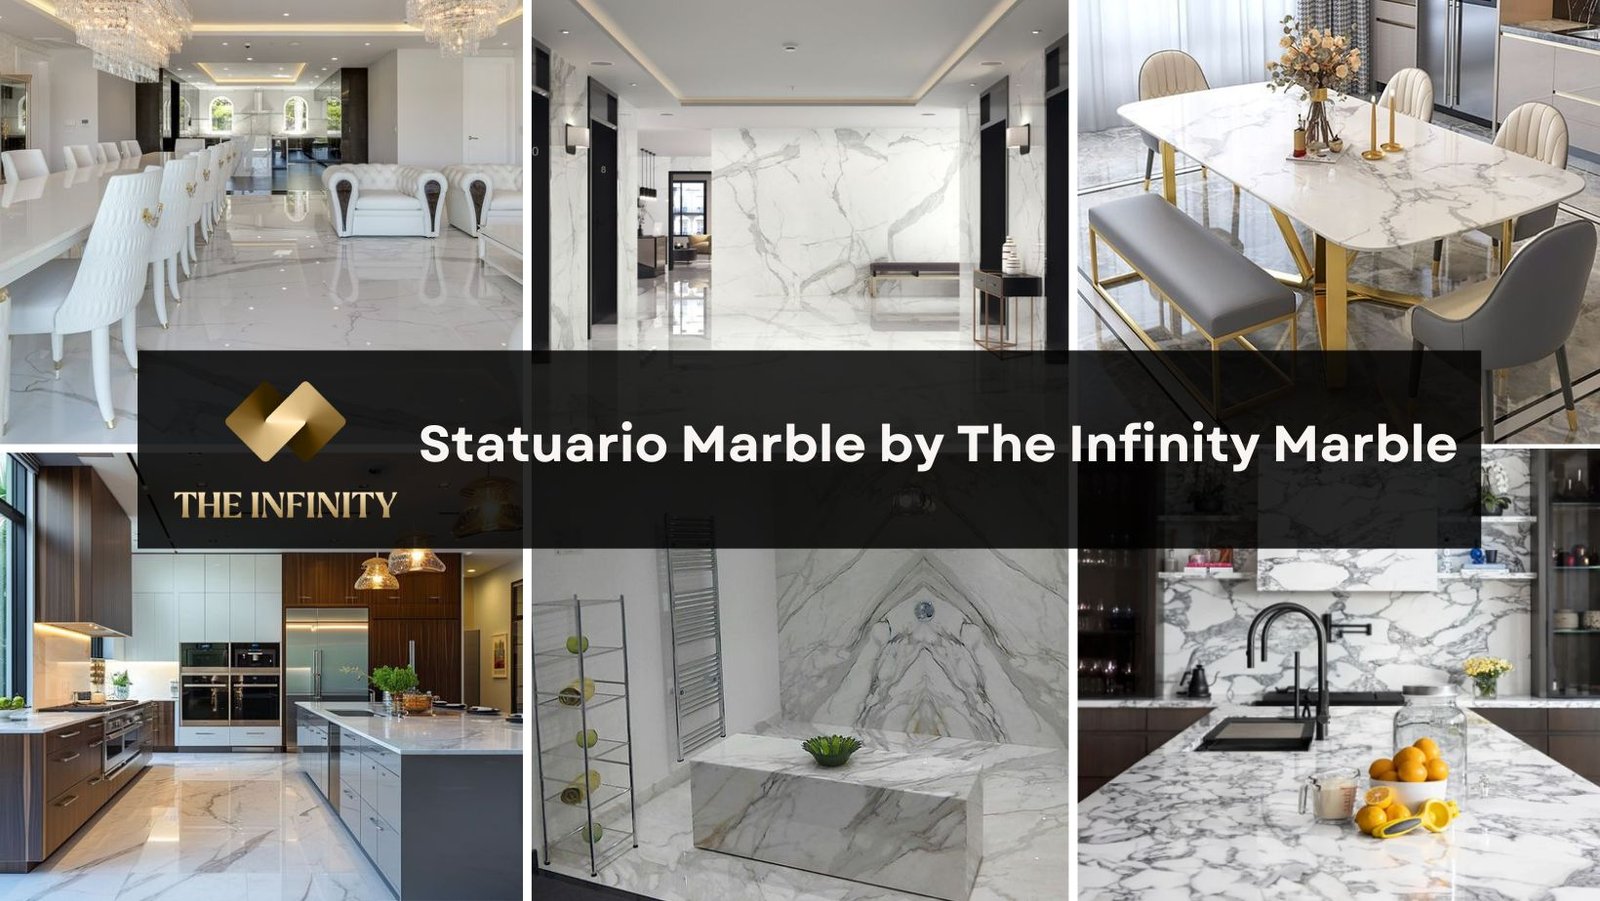 Top 10 FAQs About Statuario Marble